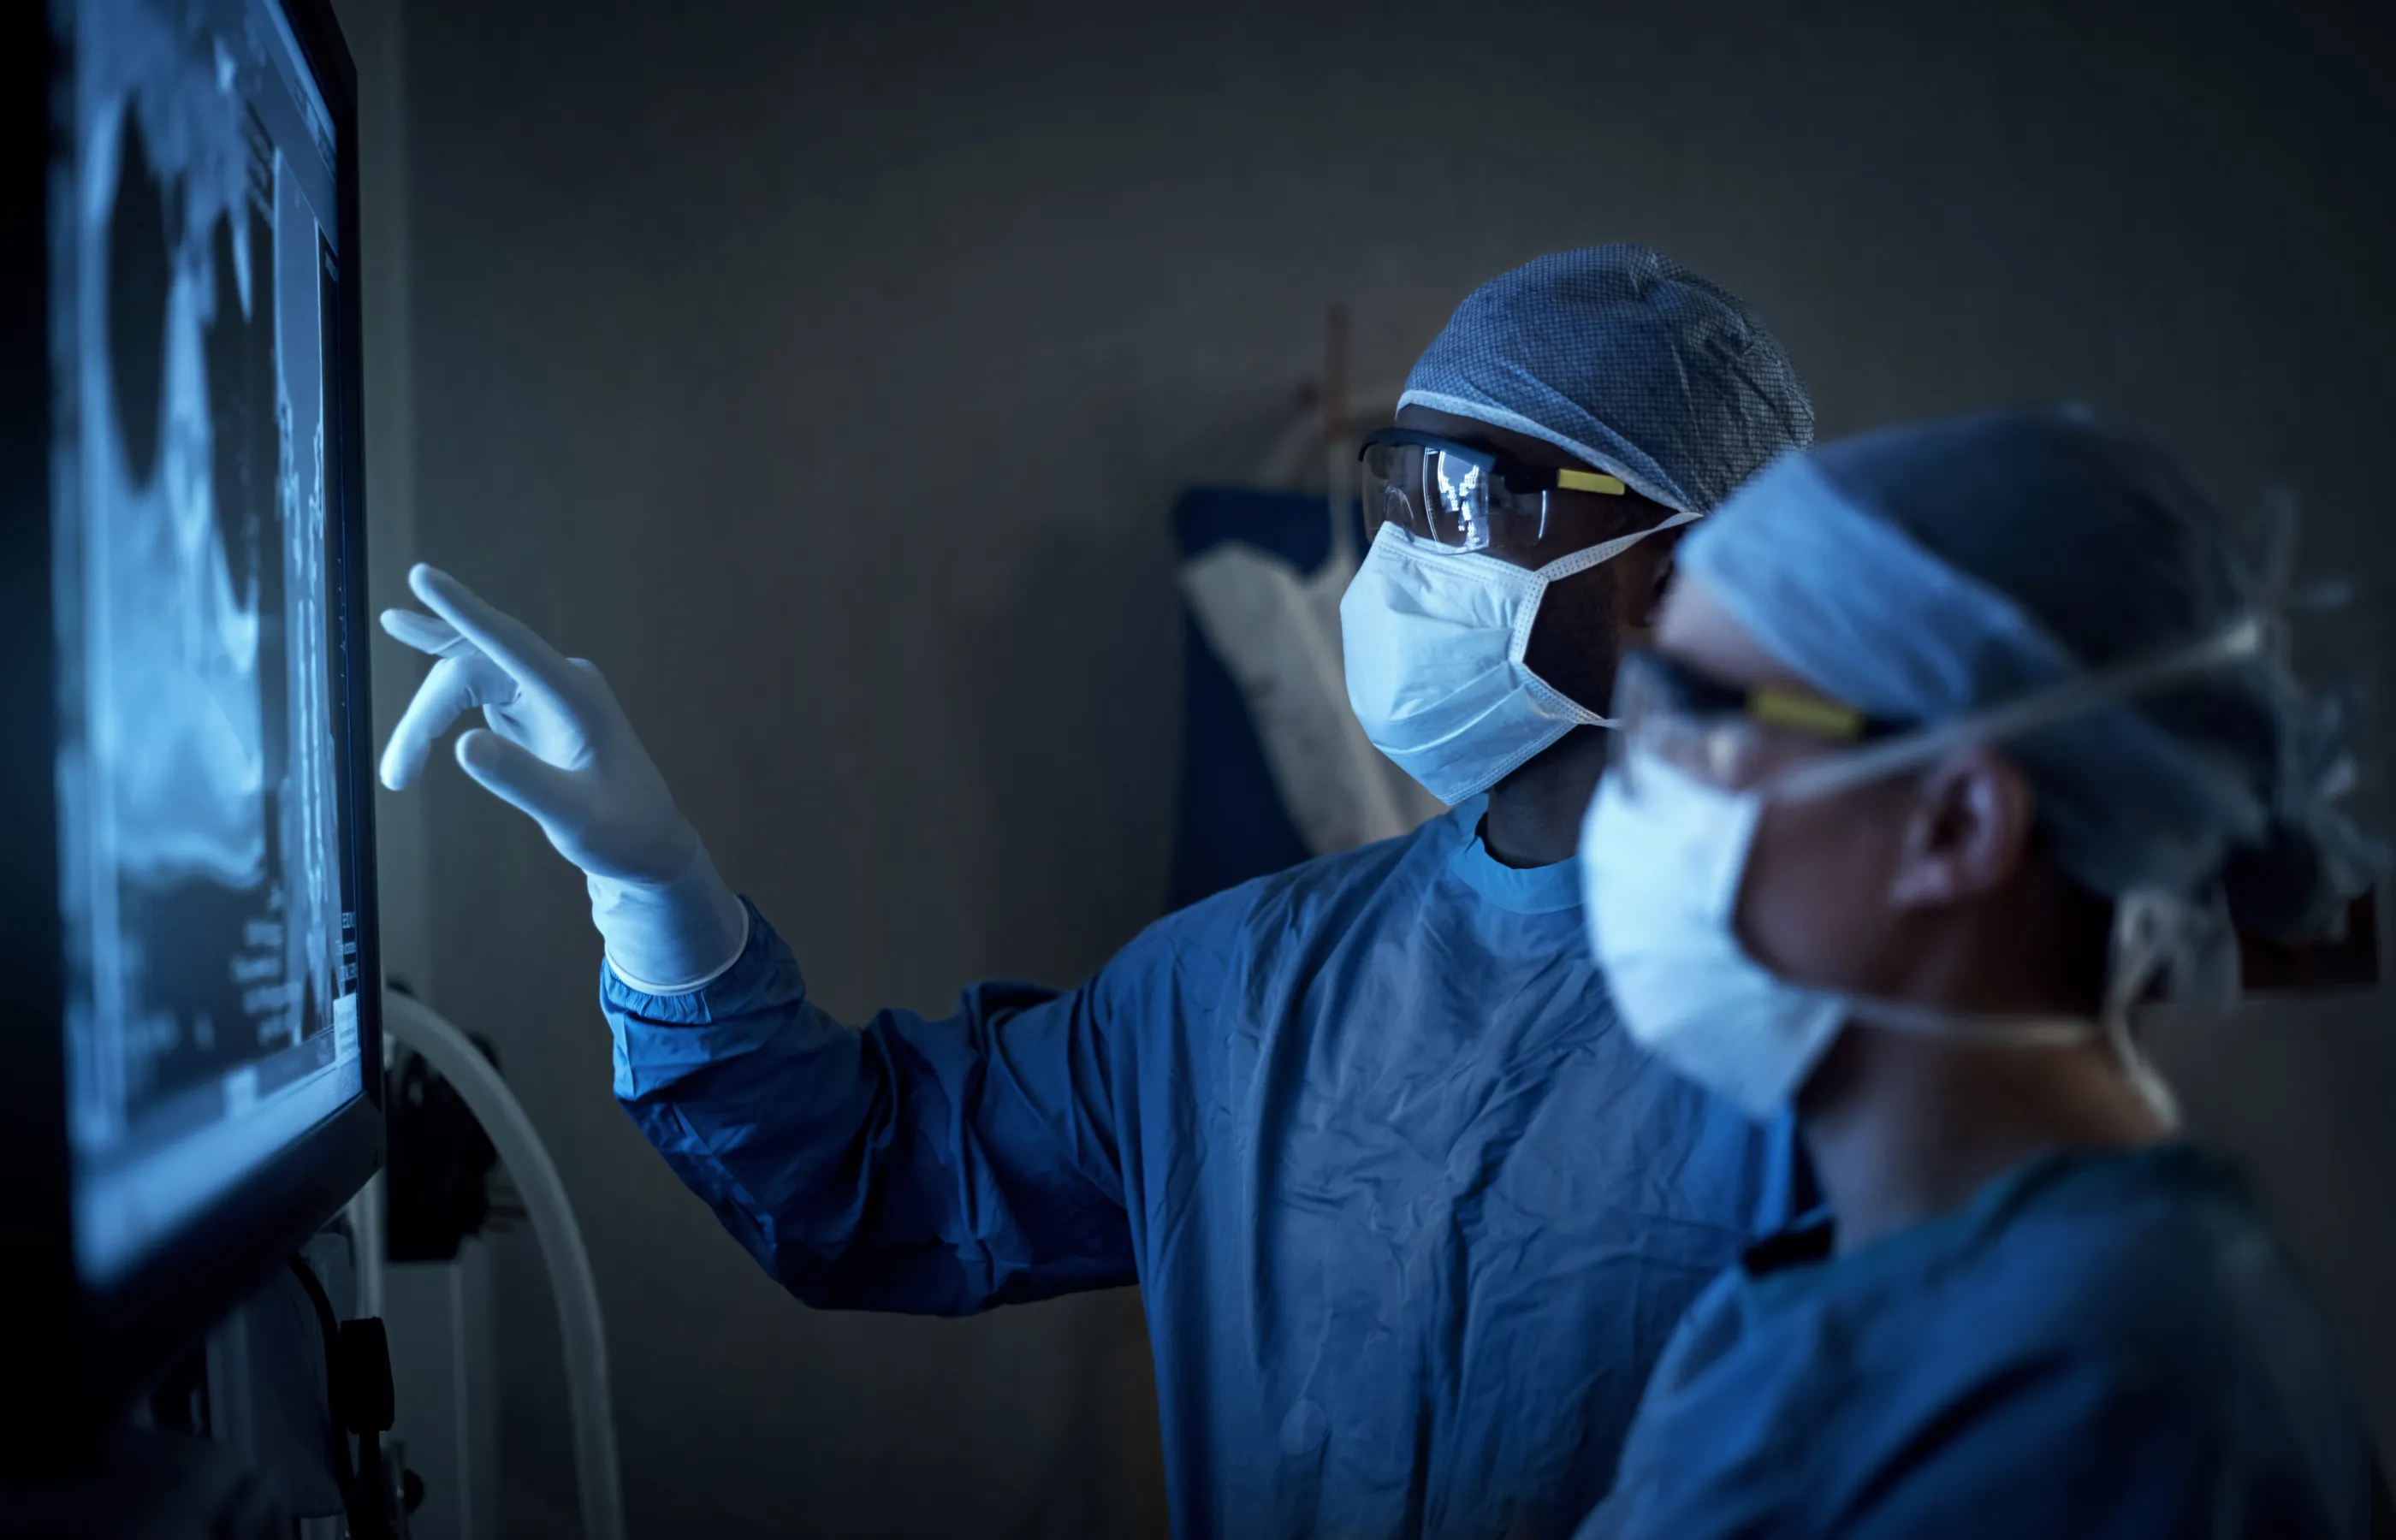 Two surgeons analyzing a patient’s medical scans during surgery